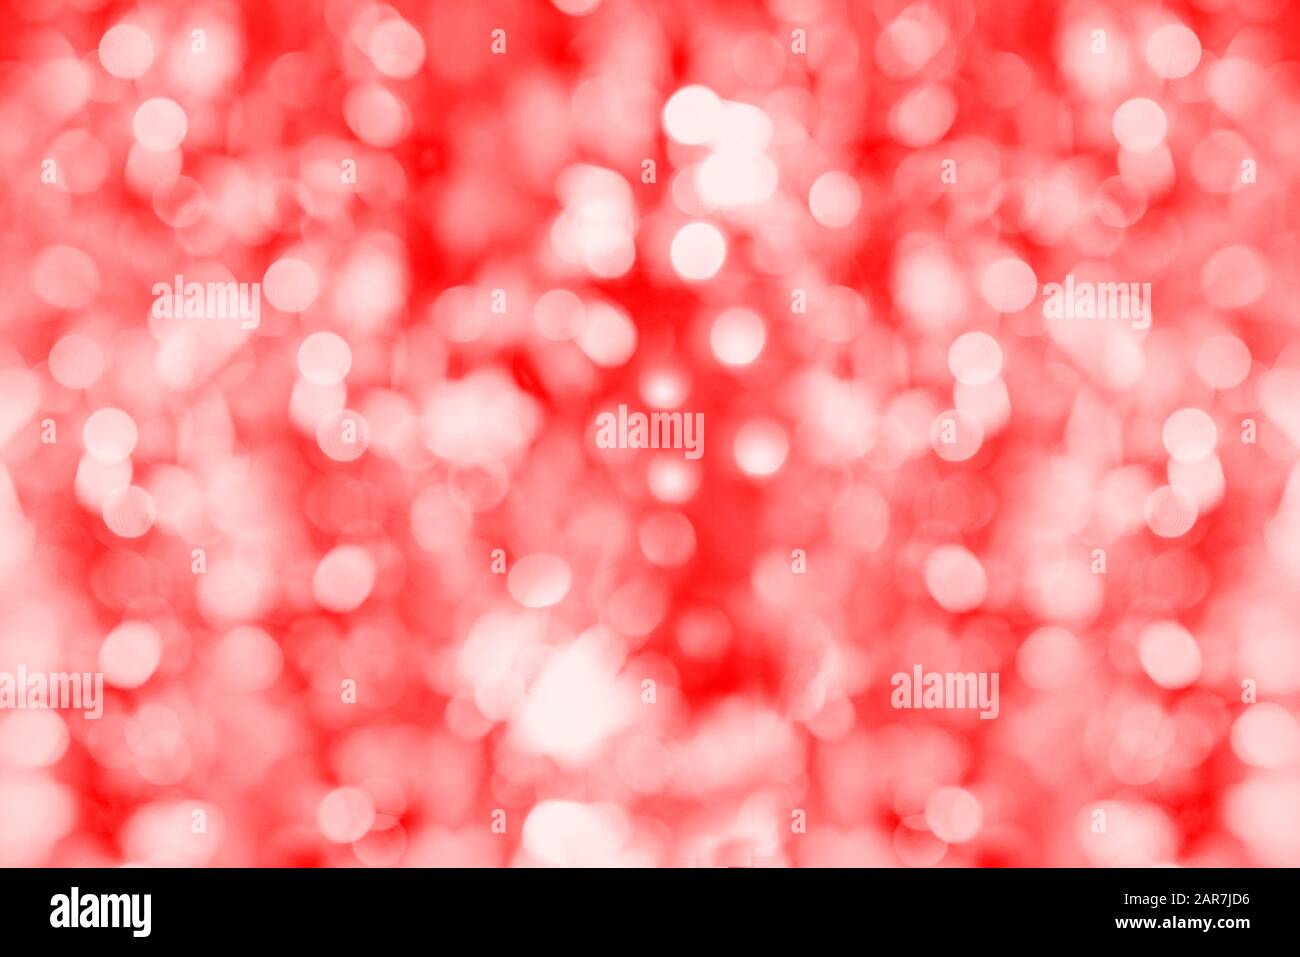 Red bokeh. Unobtrusive abstract background. Soft lights. Defocused blurred. Template for design with copy space Stock Photo